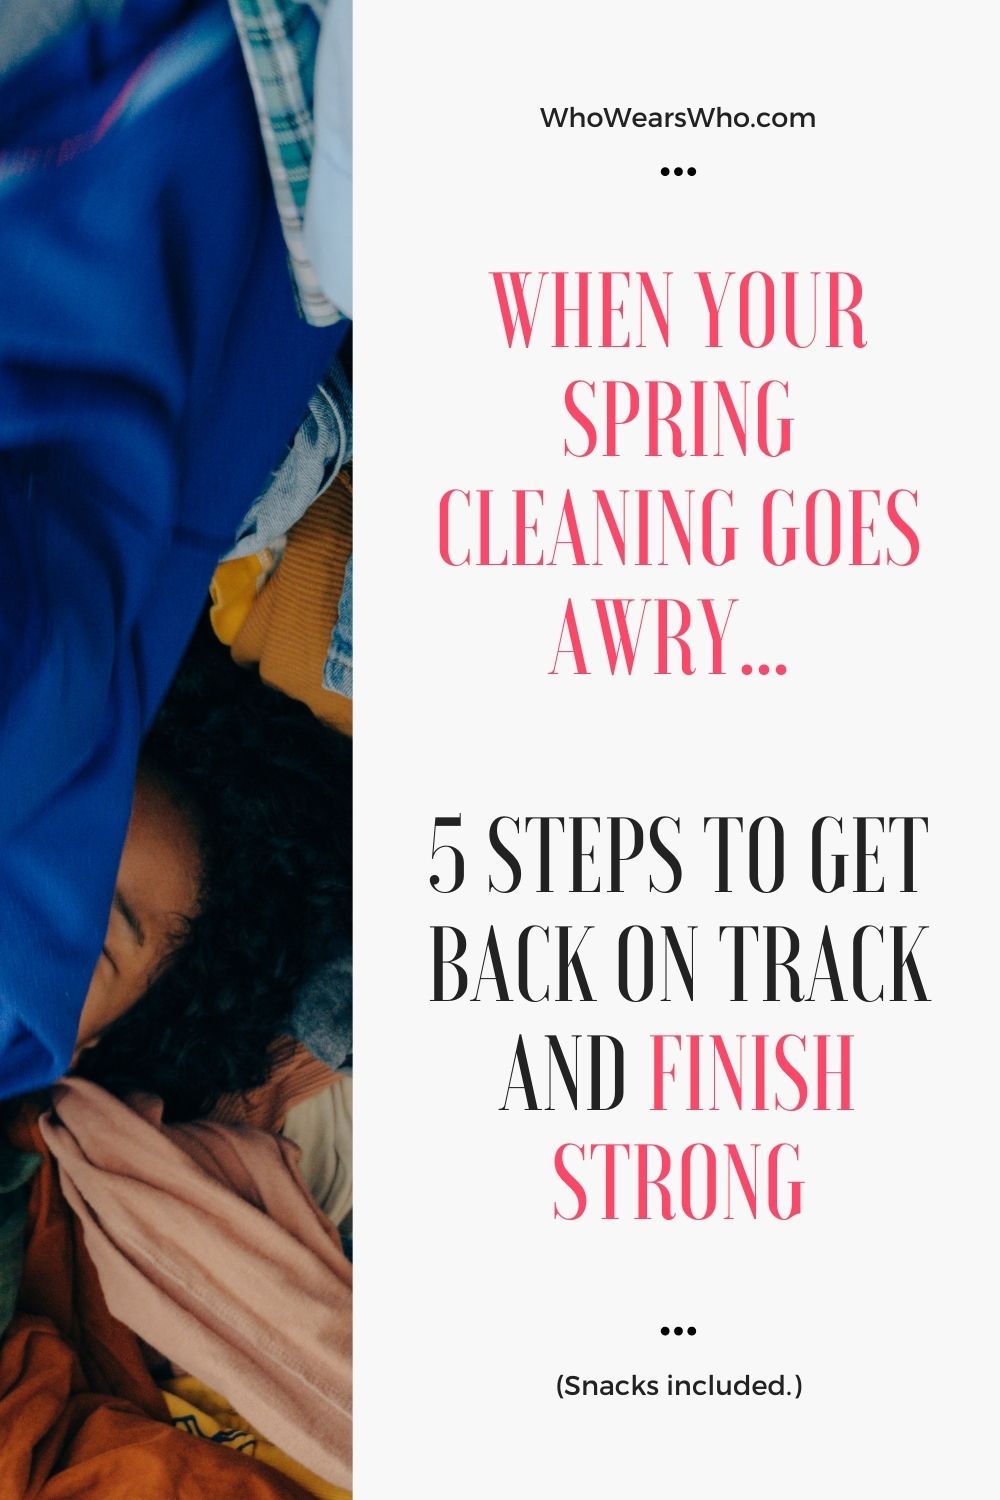 When Your Spring Cleaning Goes Awry 5 Steps to get back on track 2